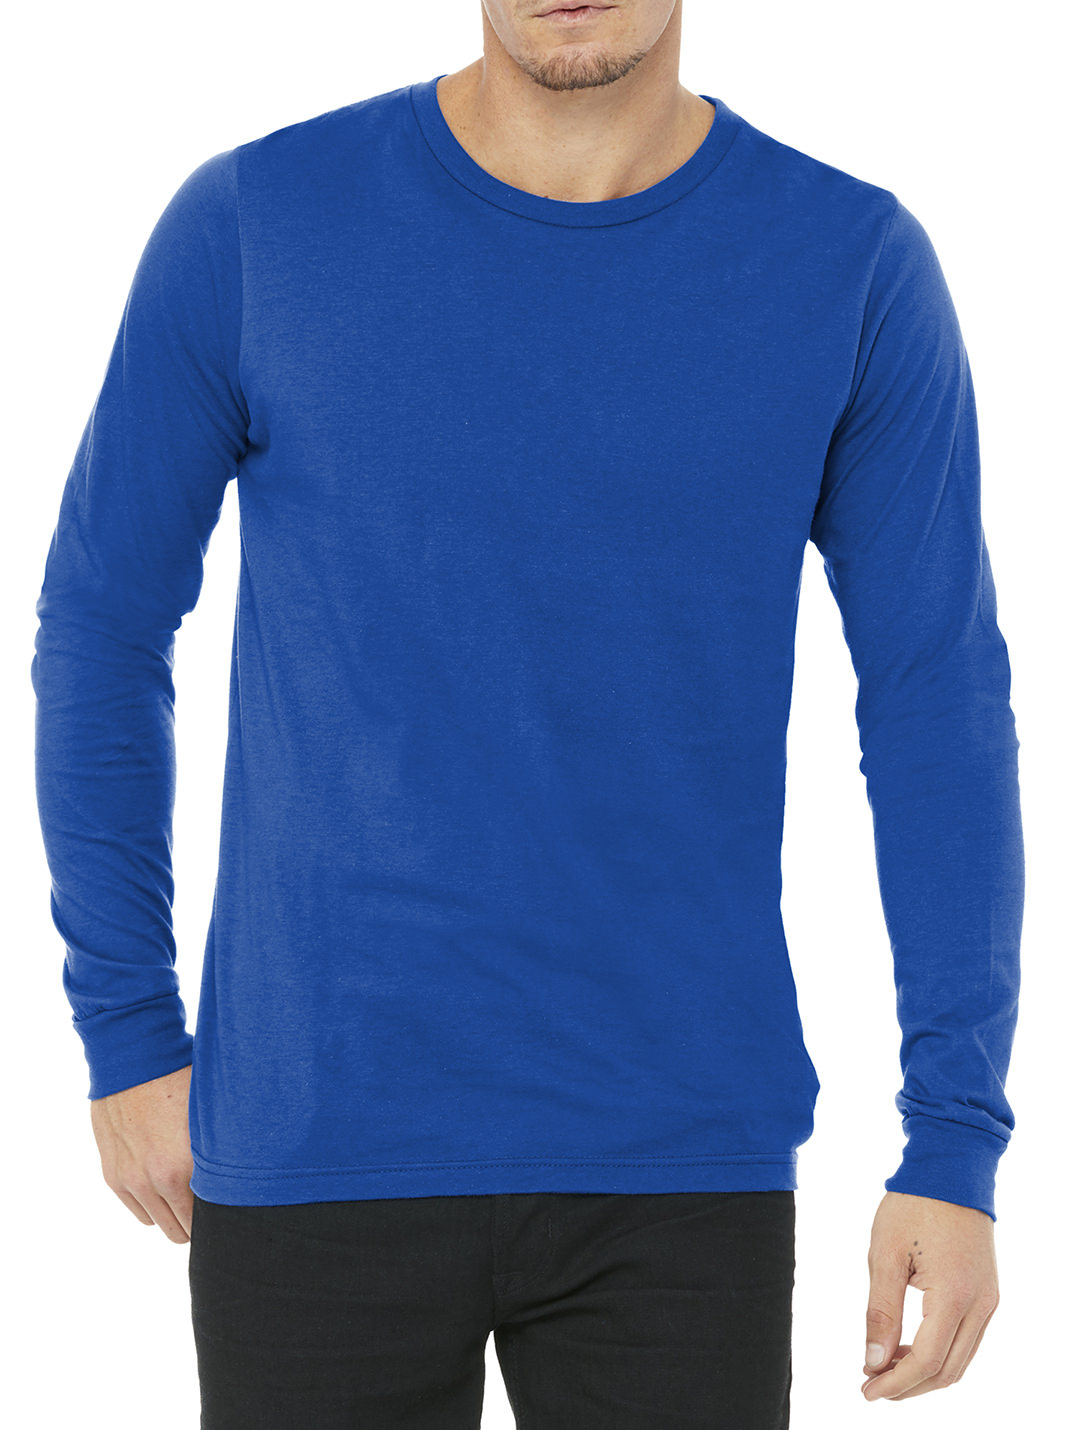 Mens Casual Long Sleeve Jersey Ribbed Cuffs Tee